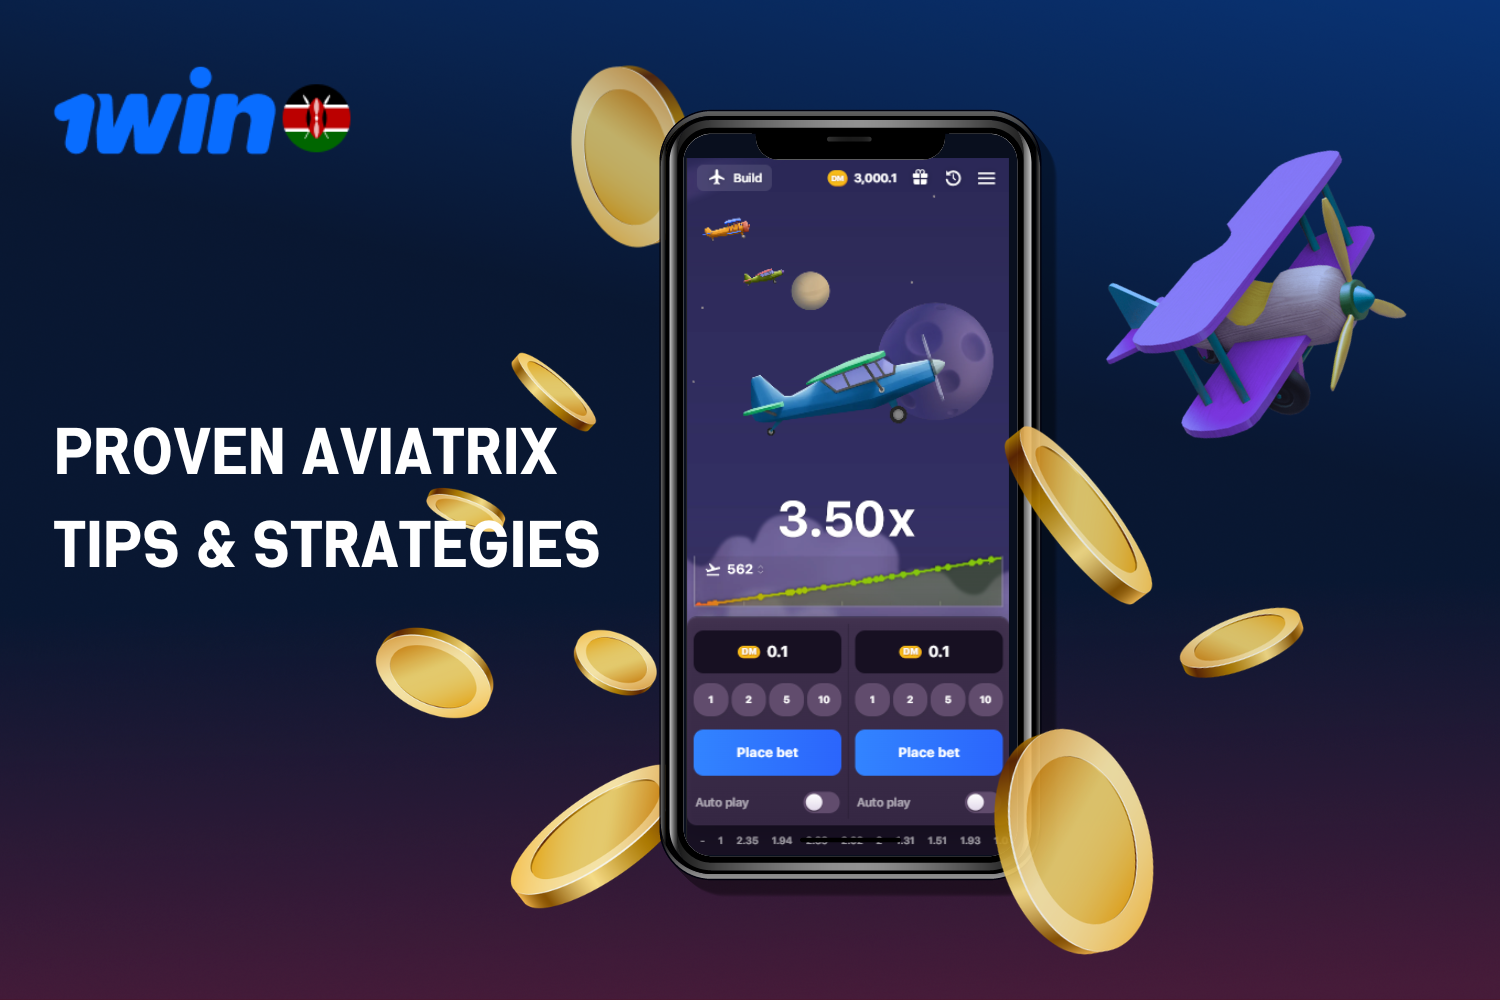 Aviatrix's proven tips and strategies at 1win will help players from Kenya win the game.